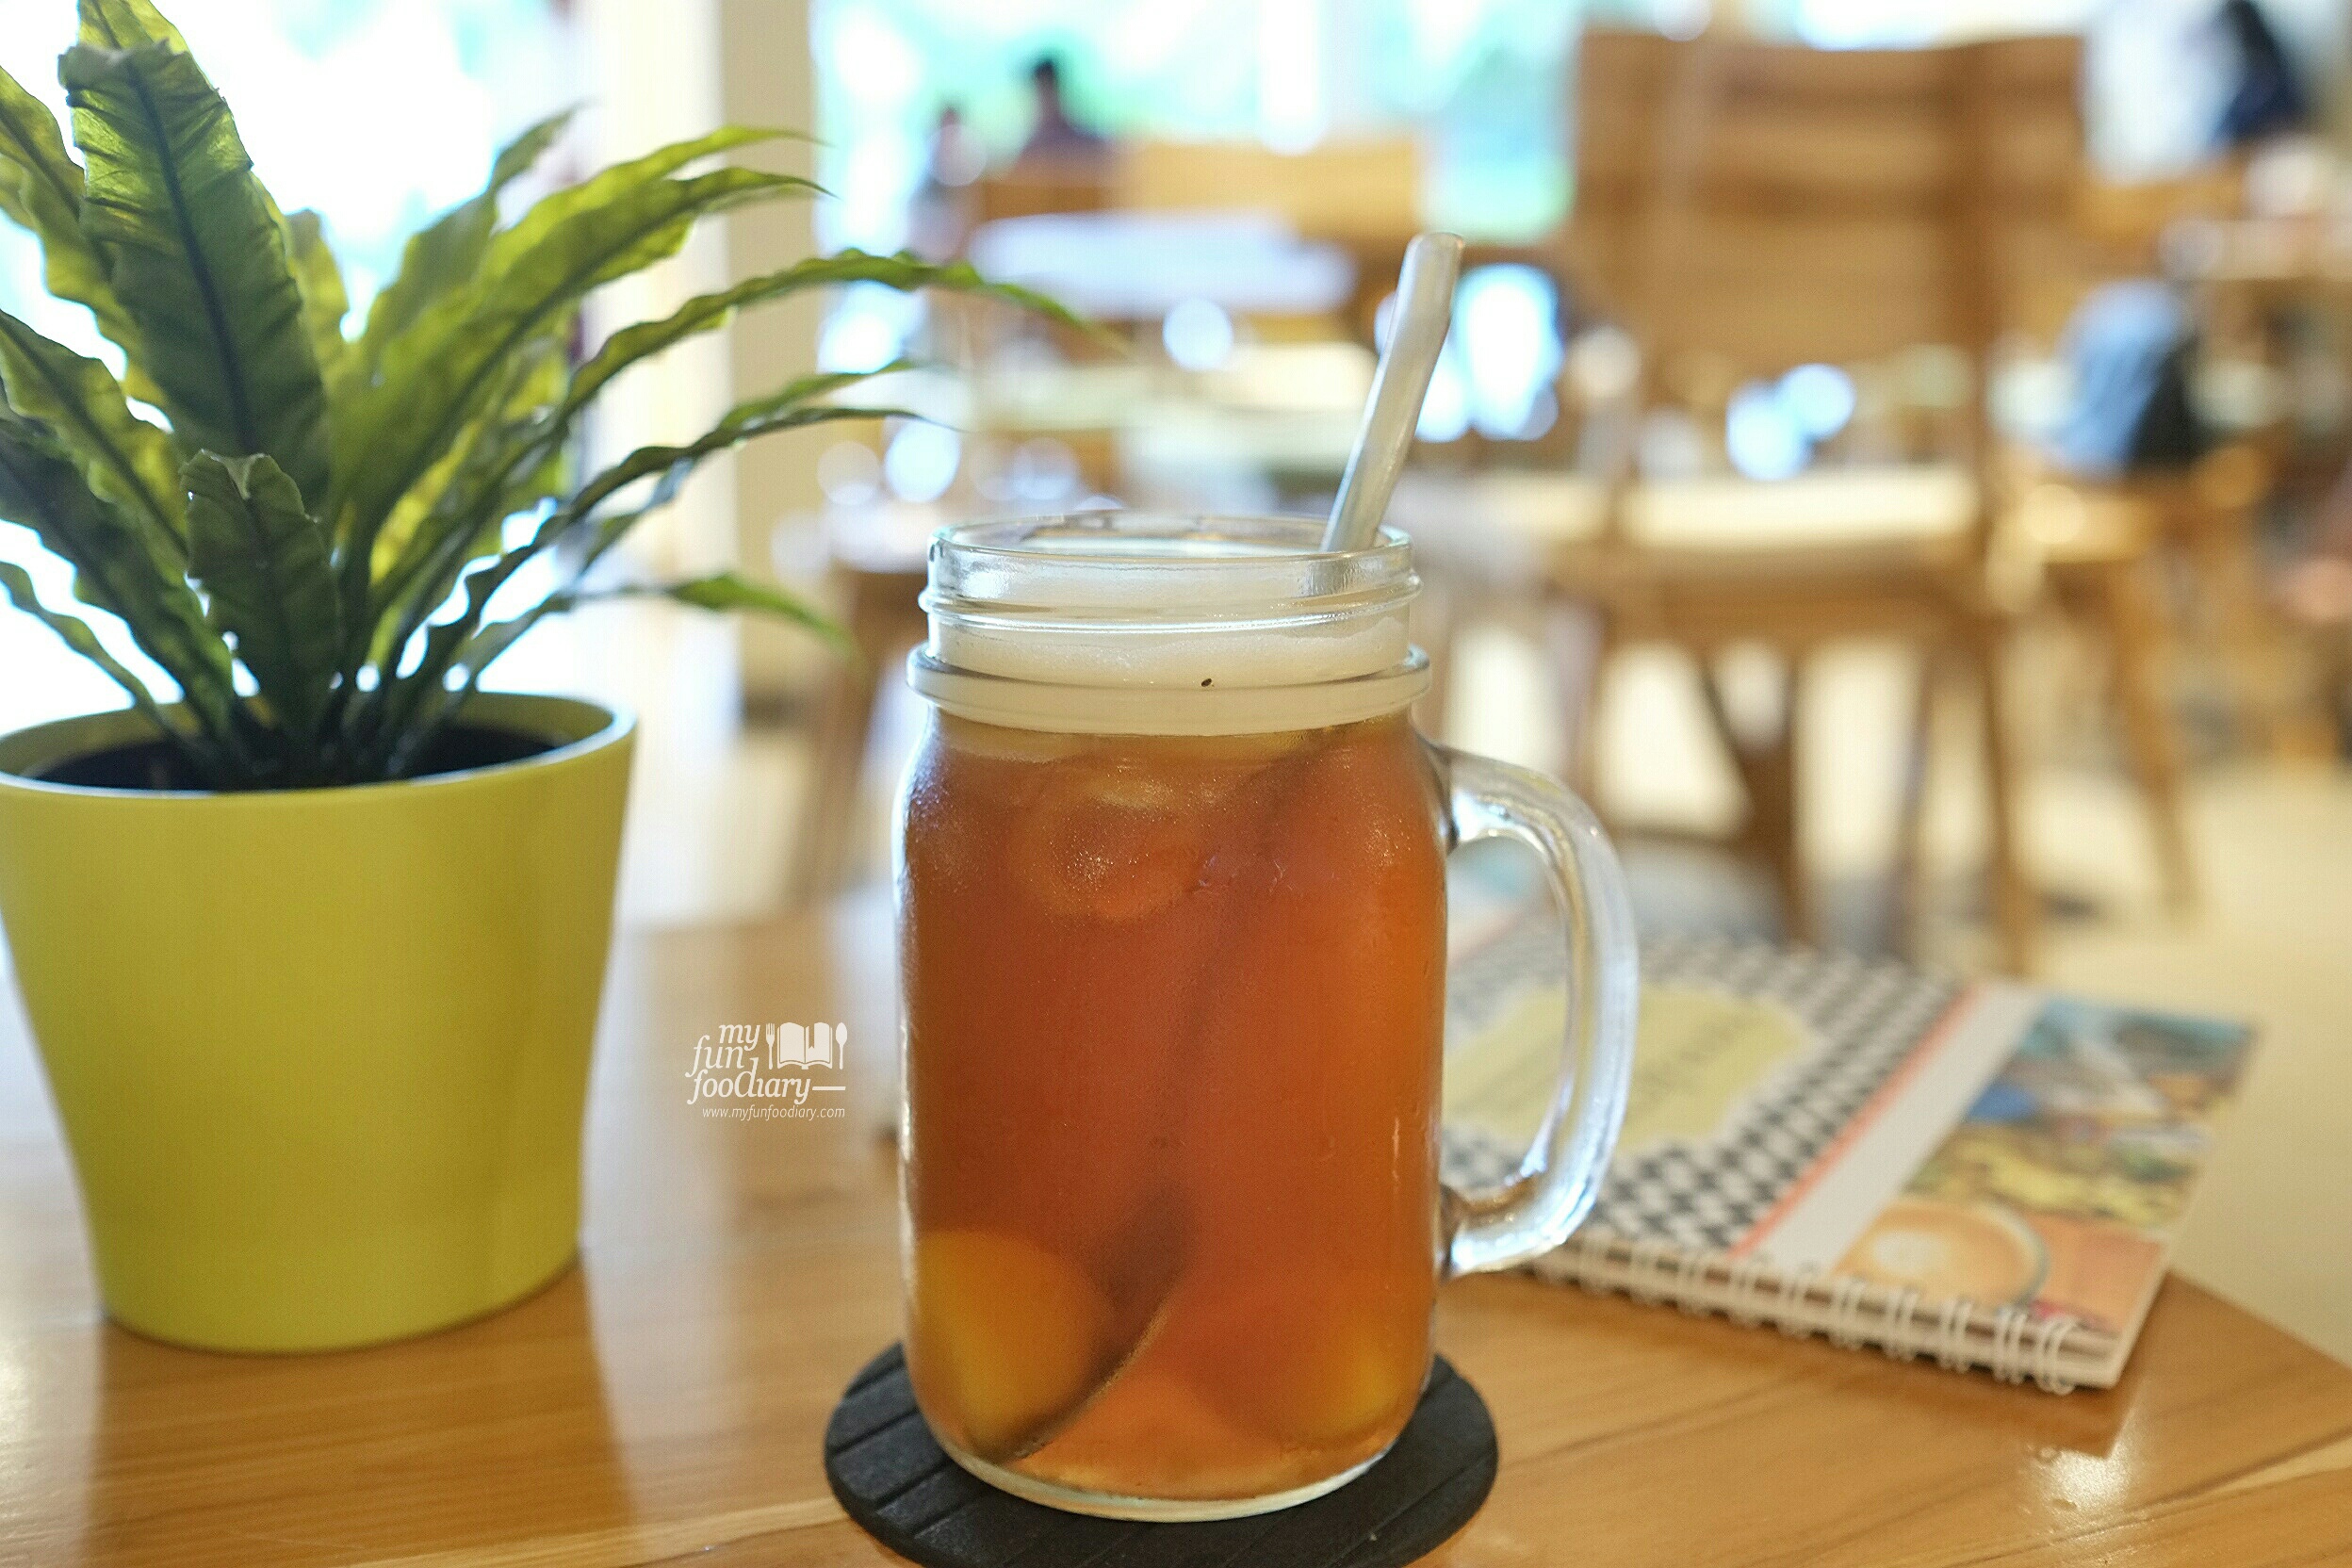 Iced Peach Tea at Honey and Me Coffee Eatery by Myfunfoodiary